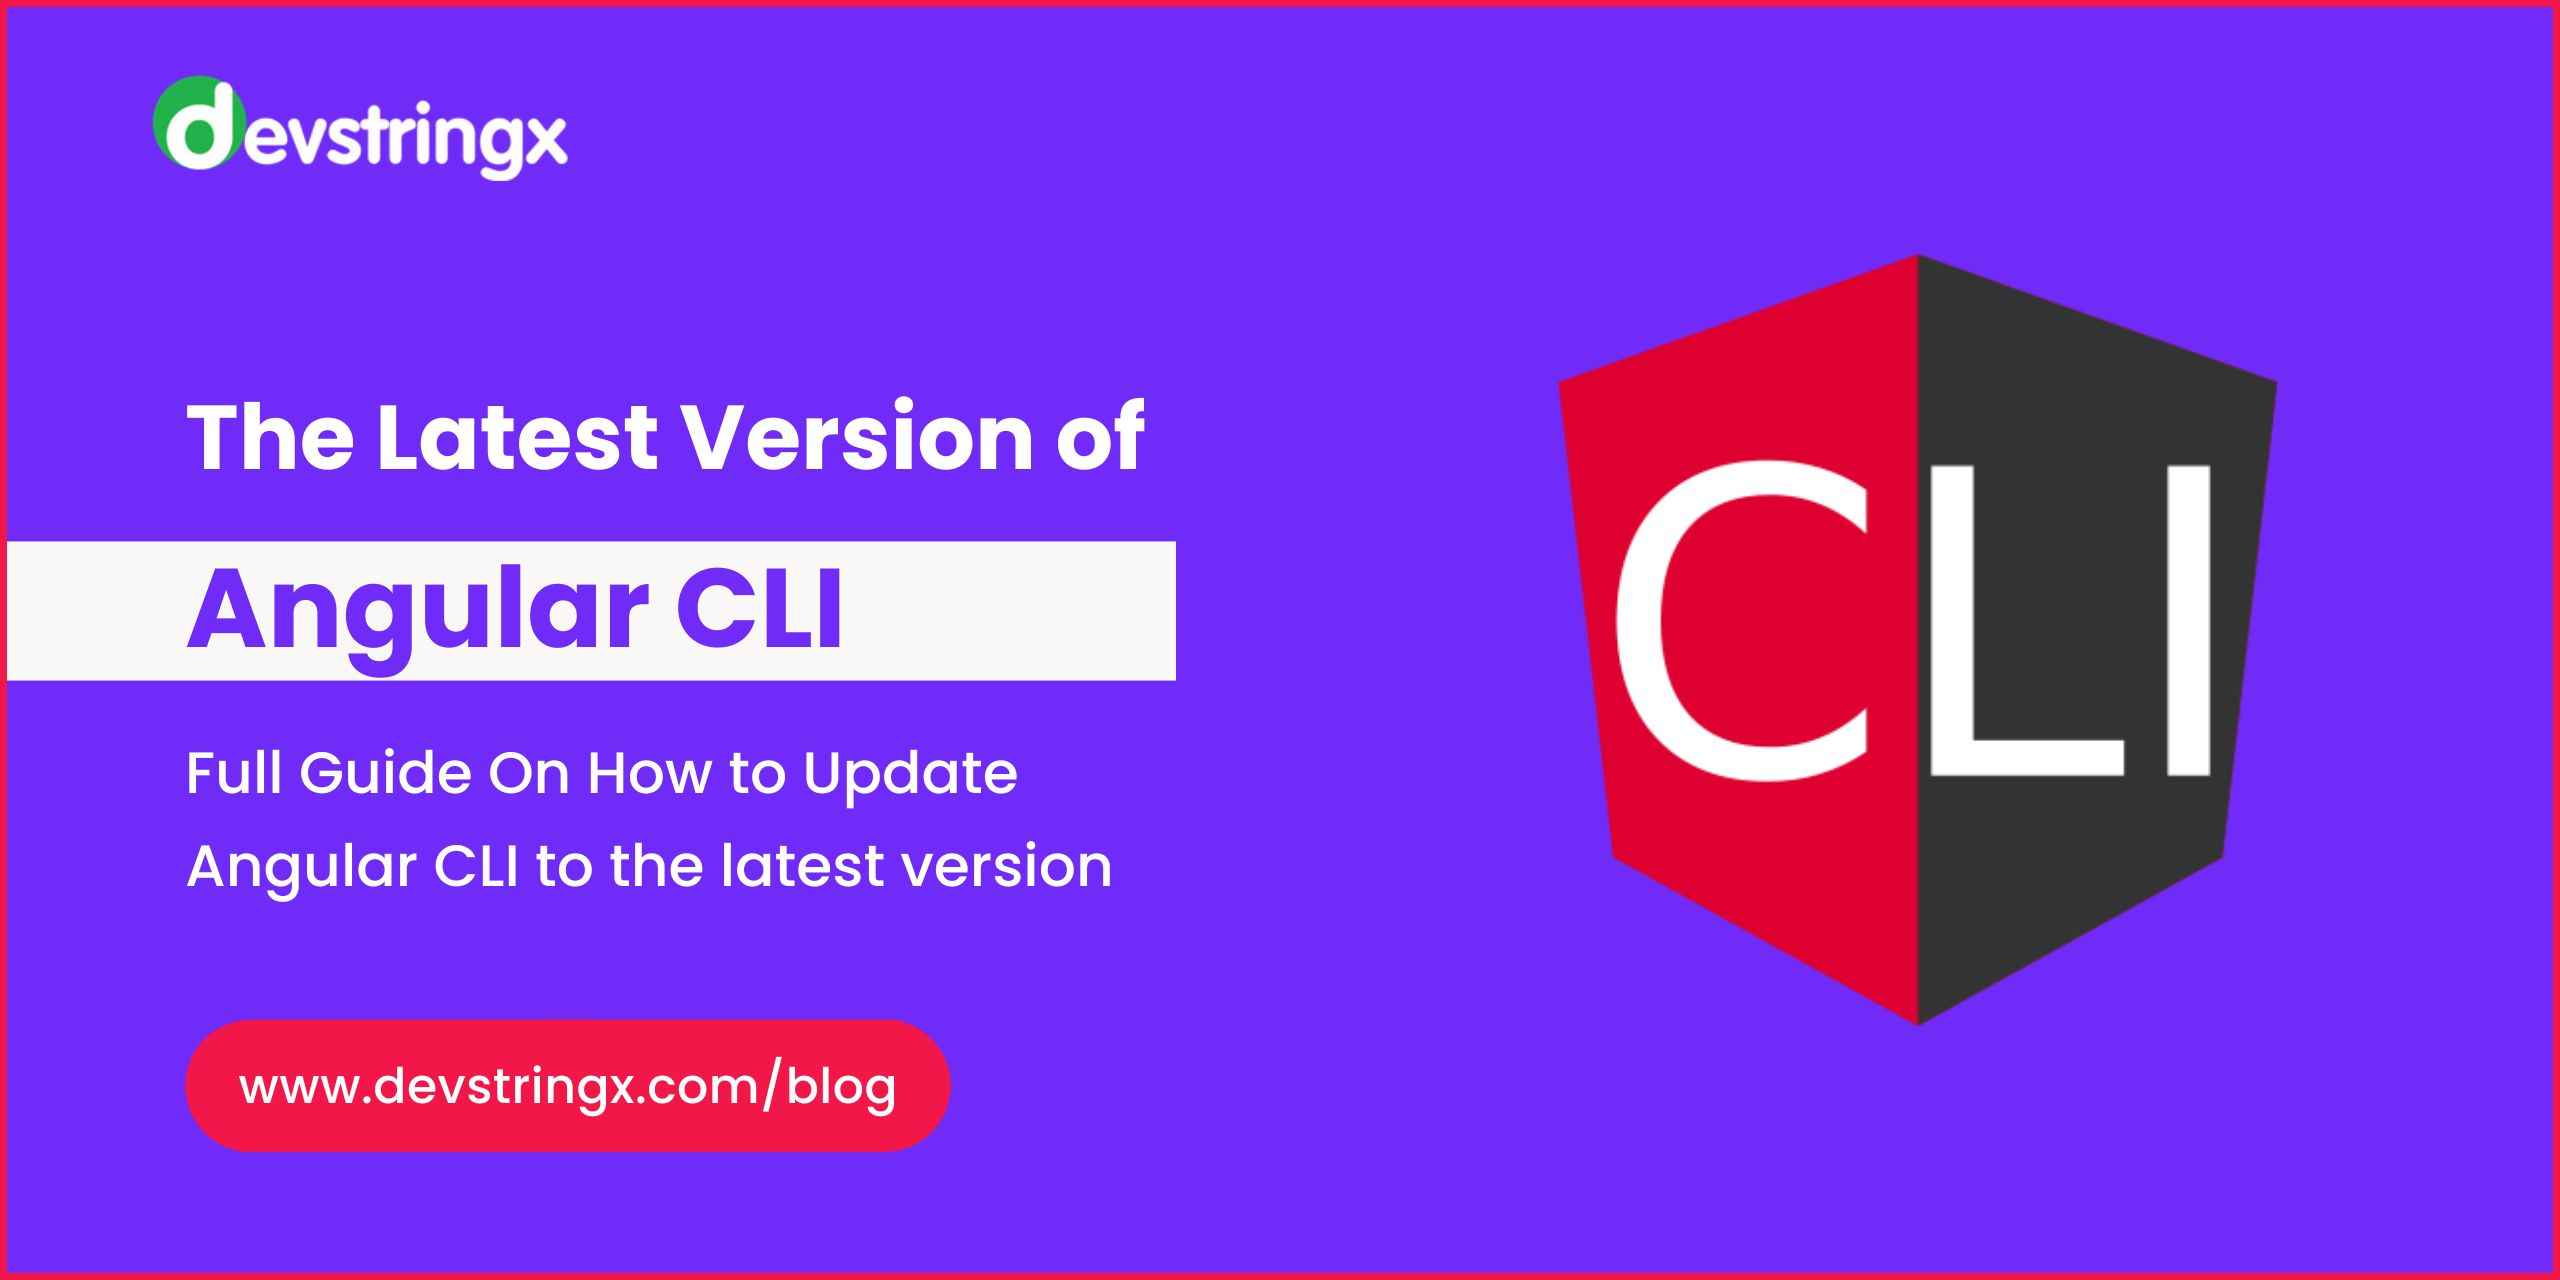 Feature image on latest version of Angular CLI